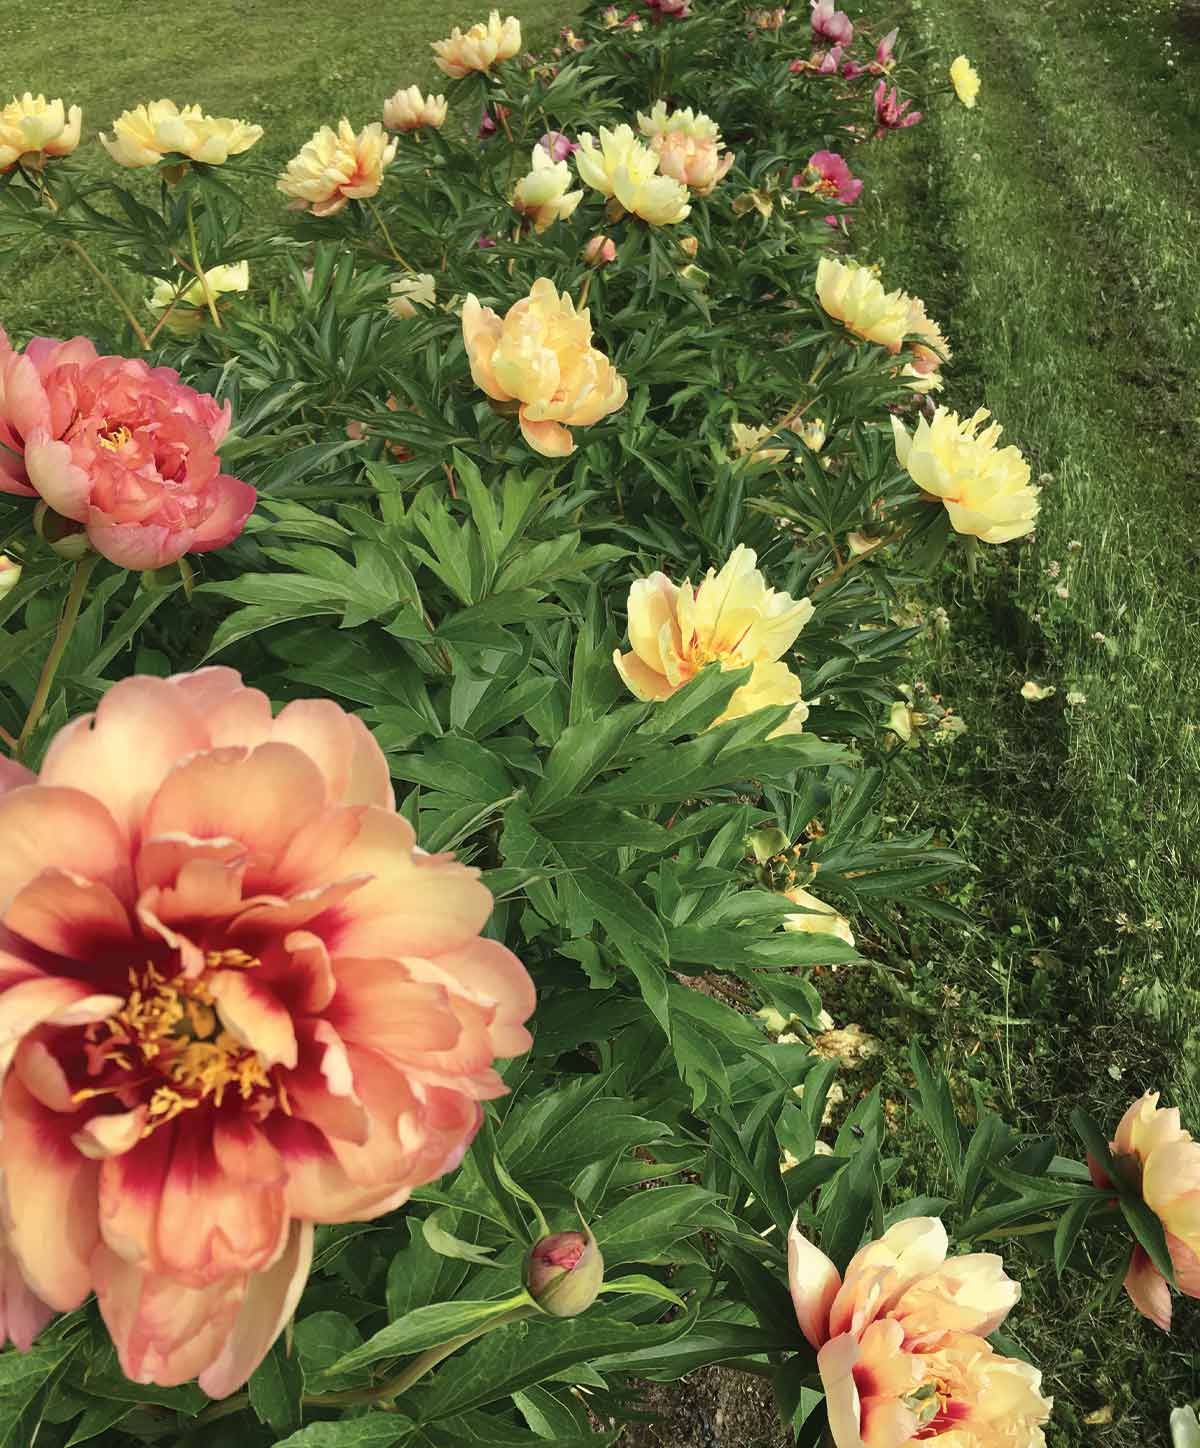 orange, yellow, and maroon peonies in a row